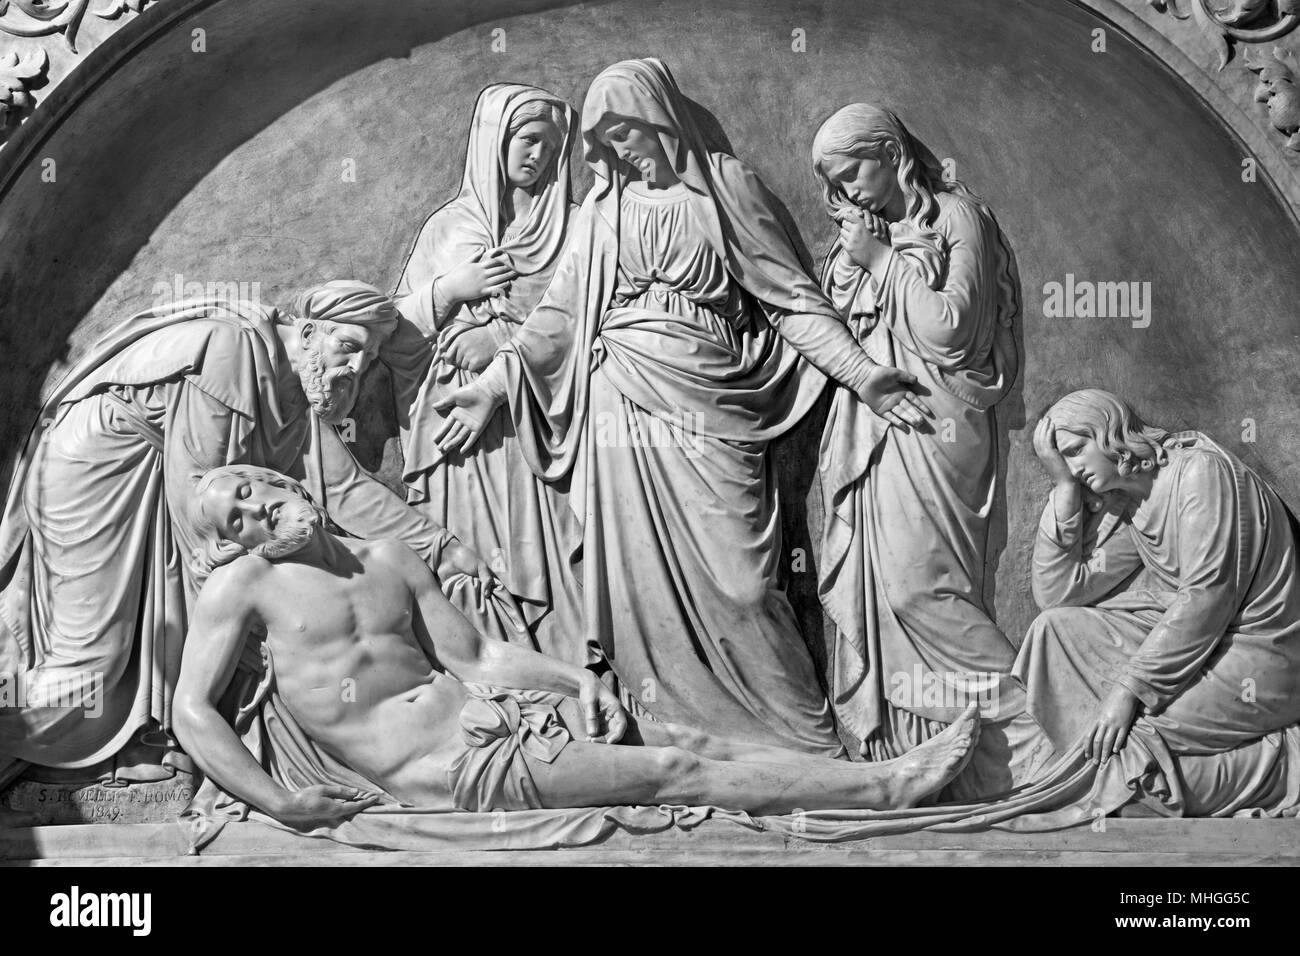 TURIN, ITALY - MARCH 16, 2017: The the relief of Deposition of the cross (Pieta) in church Chiesa di San Massimo  by Salvatore Revelli (1816 - 1859). Stock Photo